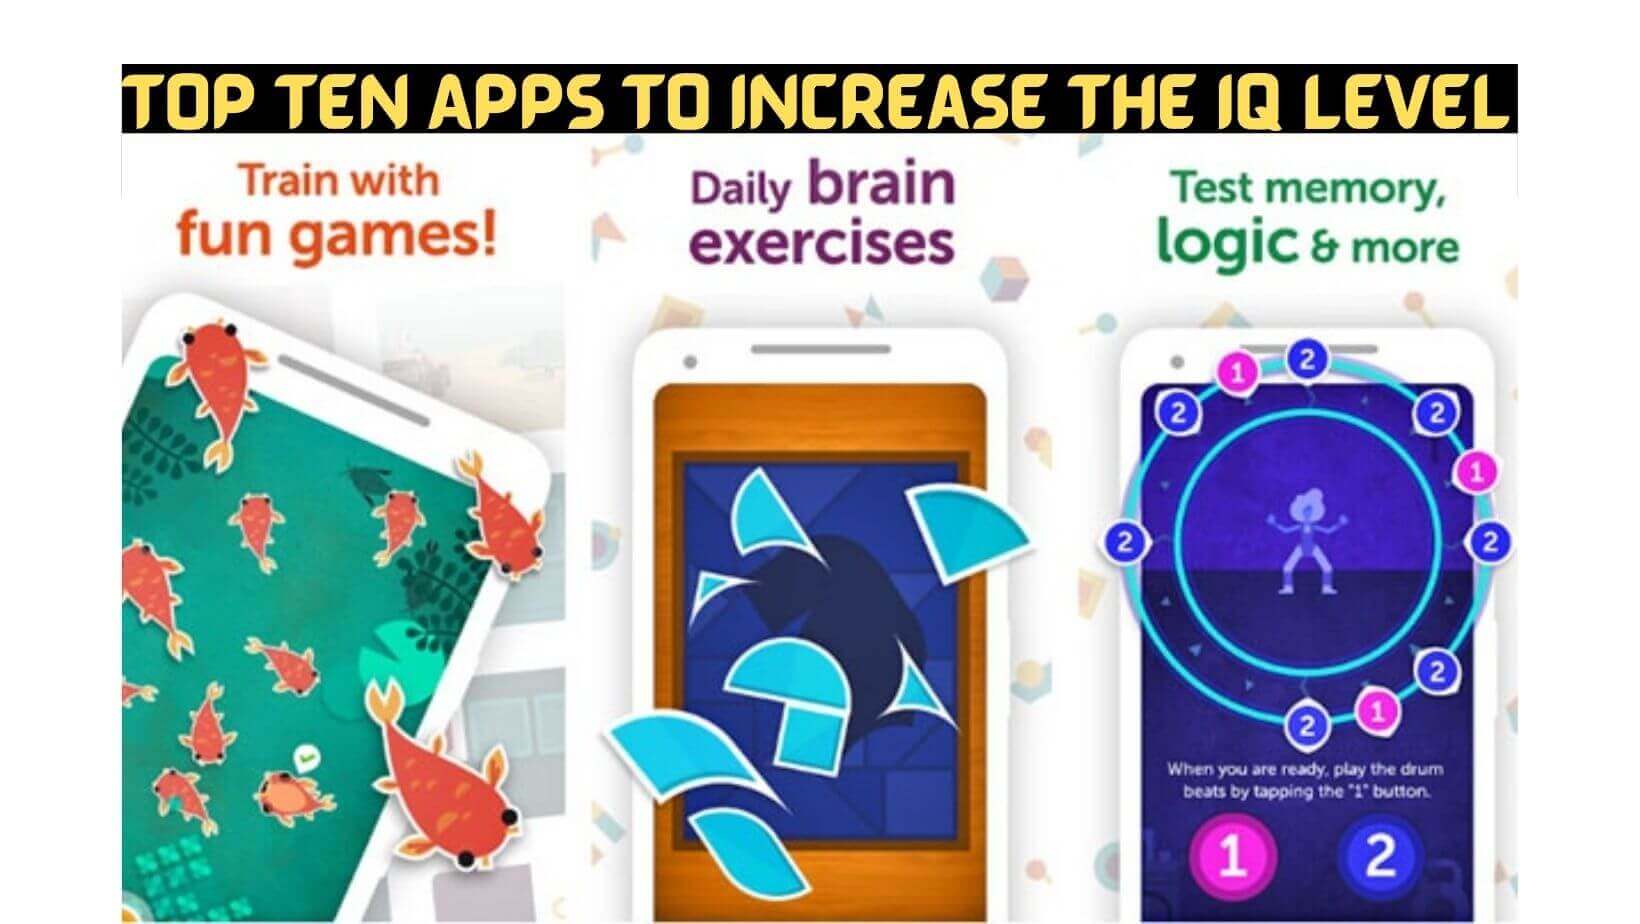 Top Ten Apps to Increase The IQ Level